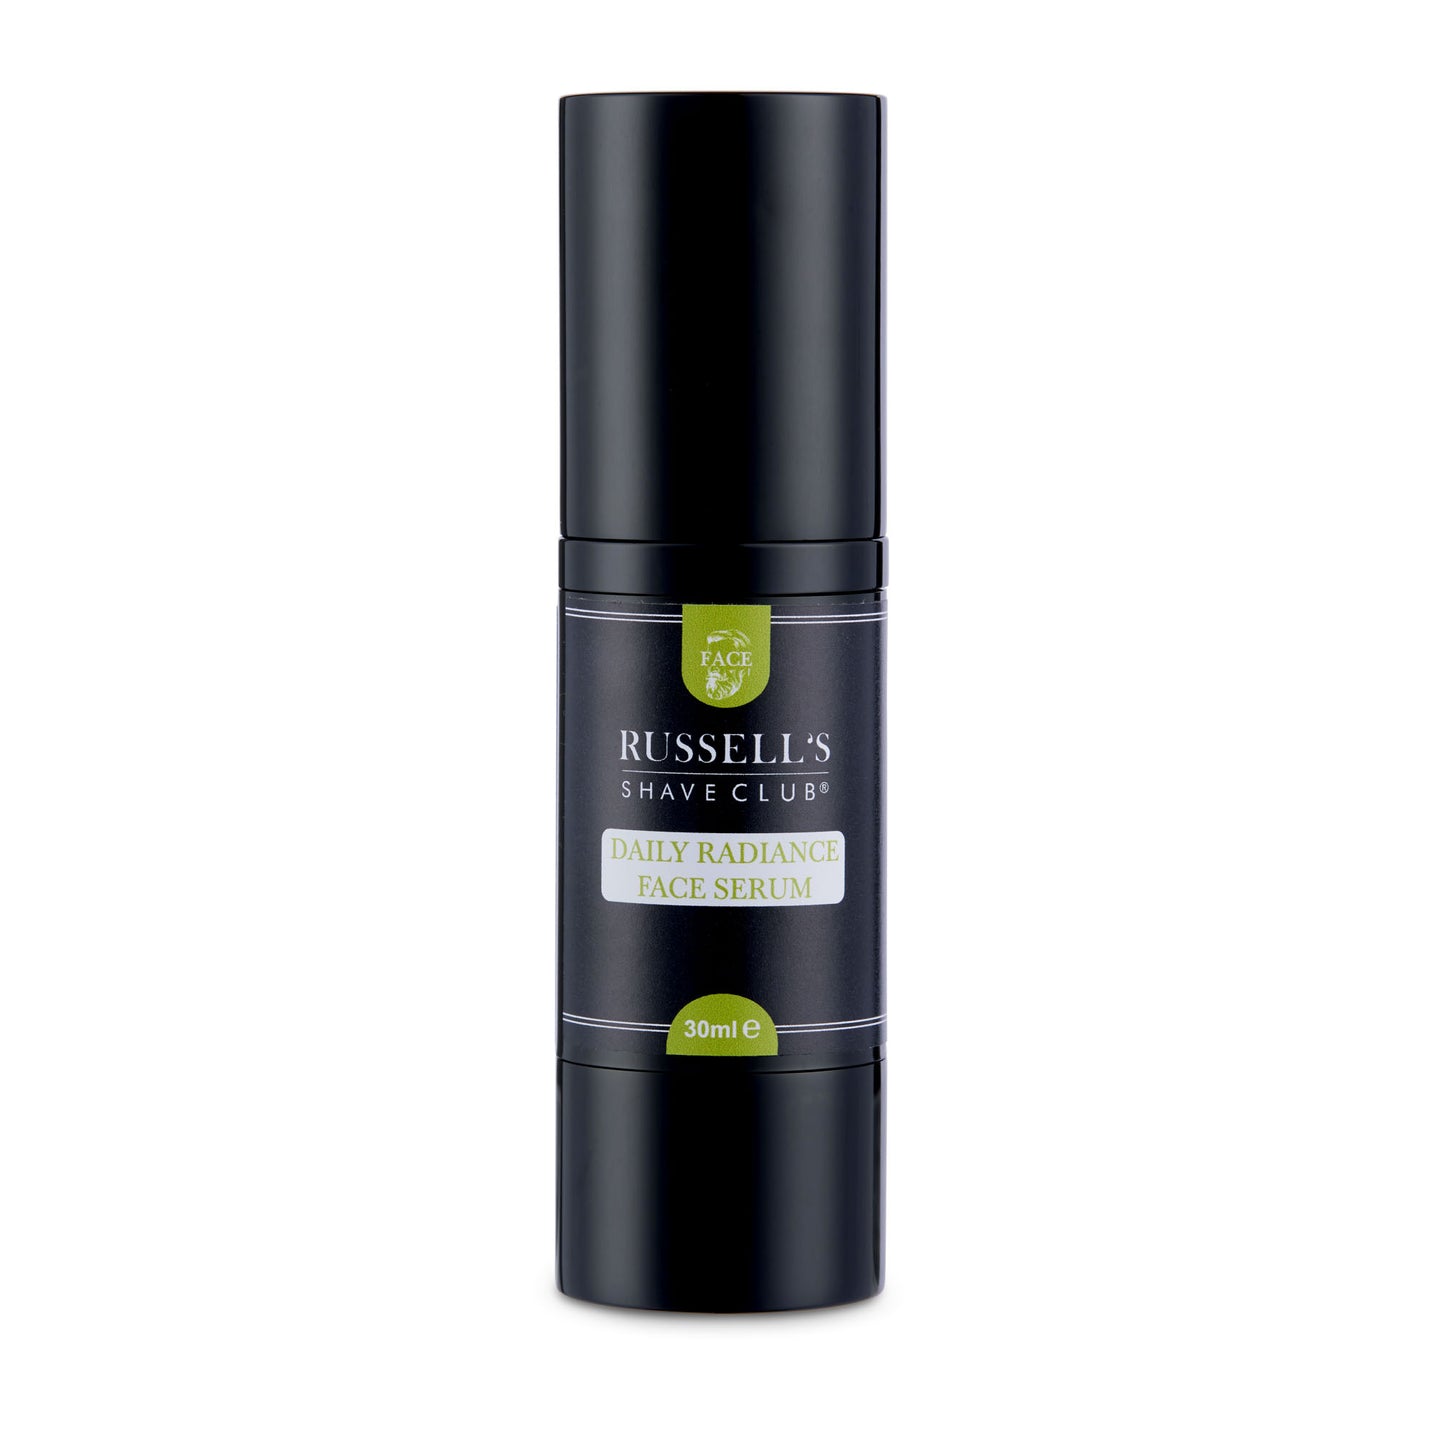 Russell's Triolein-Infused Hydrating Face Serum - 30ml